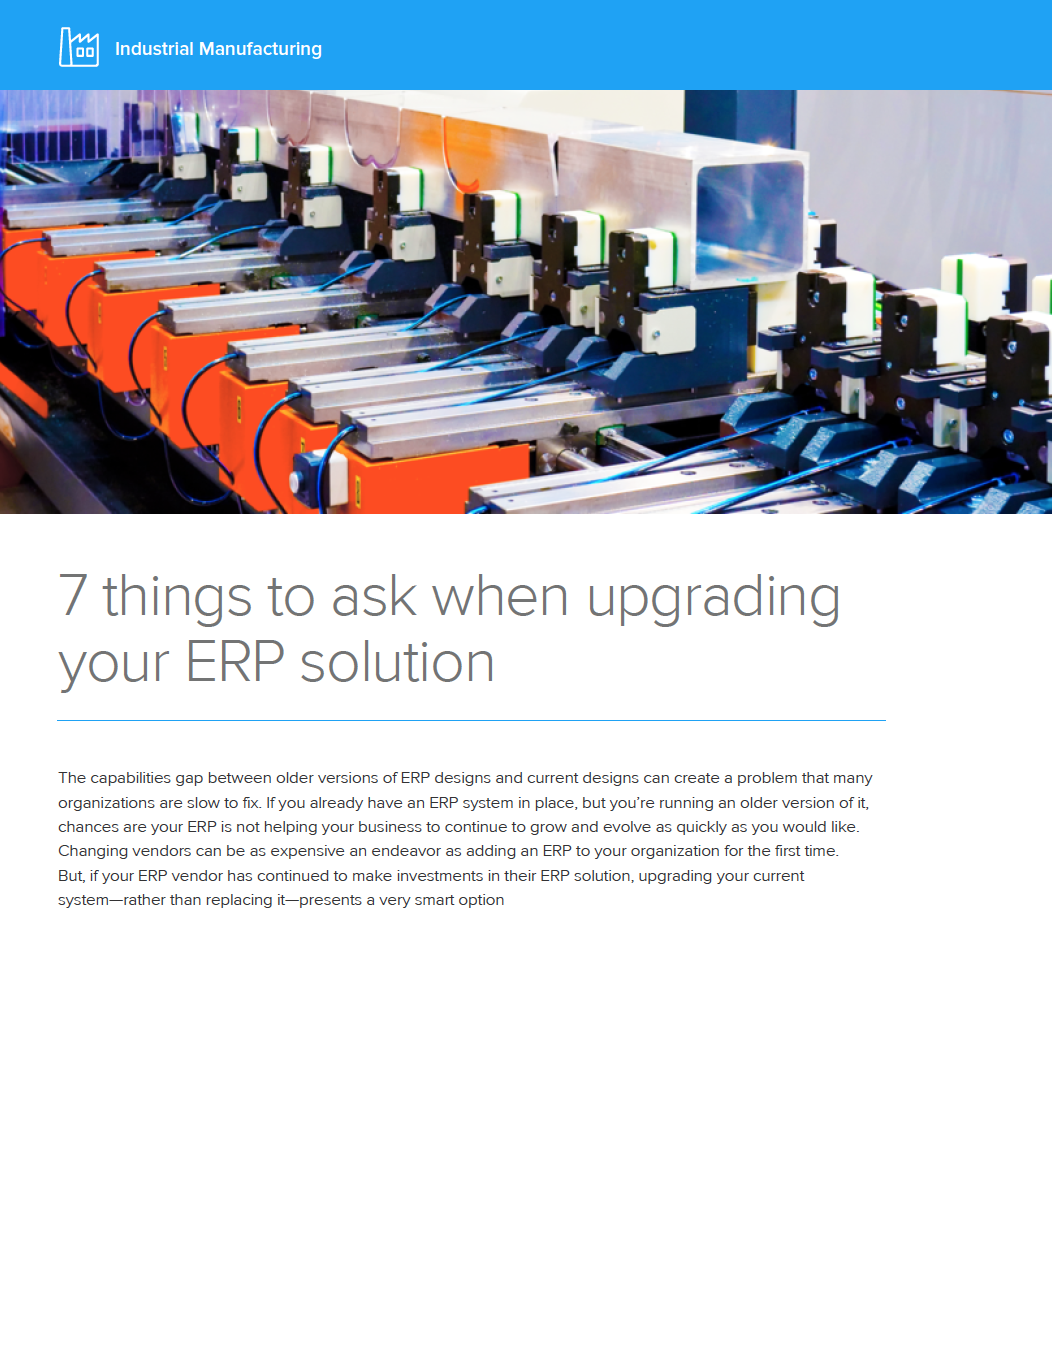 Manufacturing: 7 Questions to Ask When Upgrading Your ERP Solution